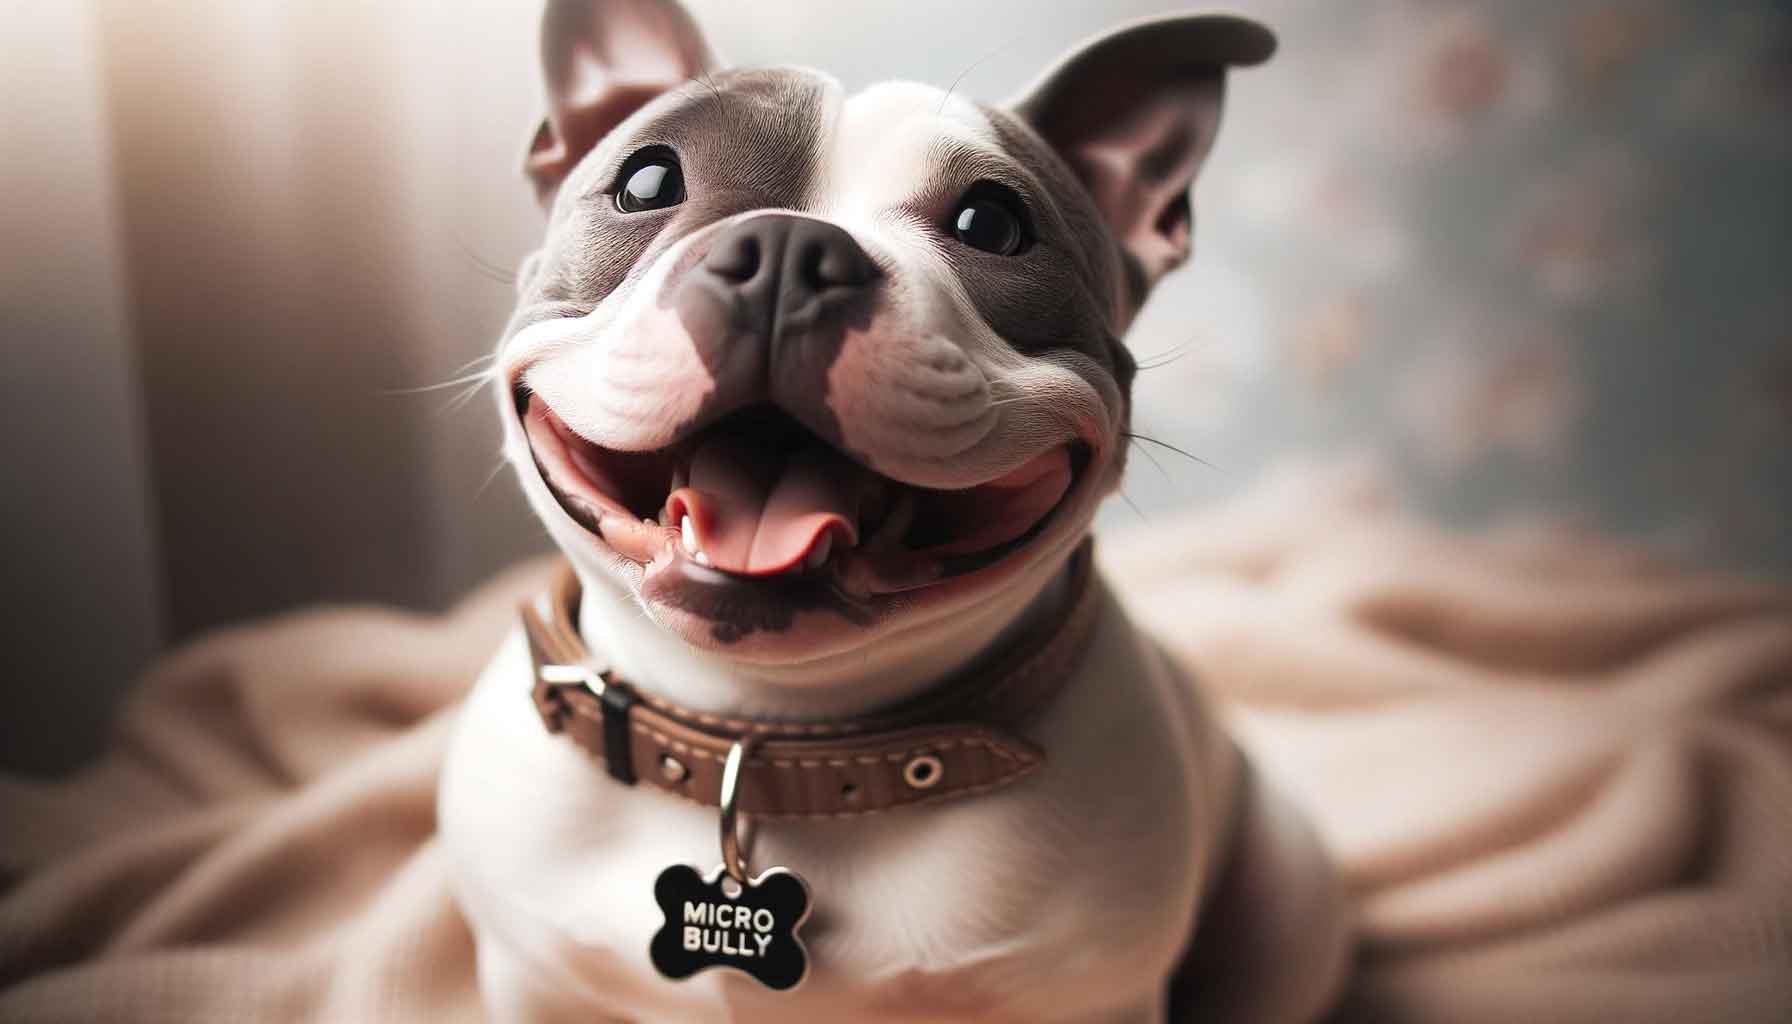 Happy Micro Bully with a shiny name tag on its collar, expressing sheer delight.